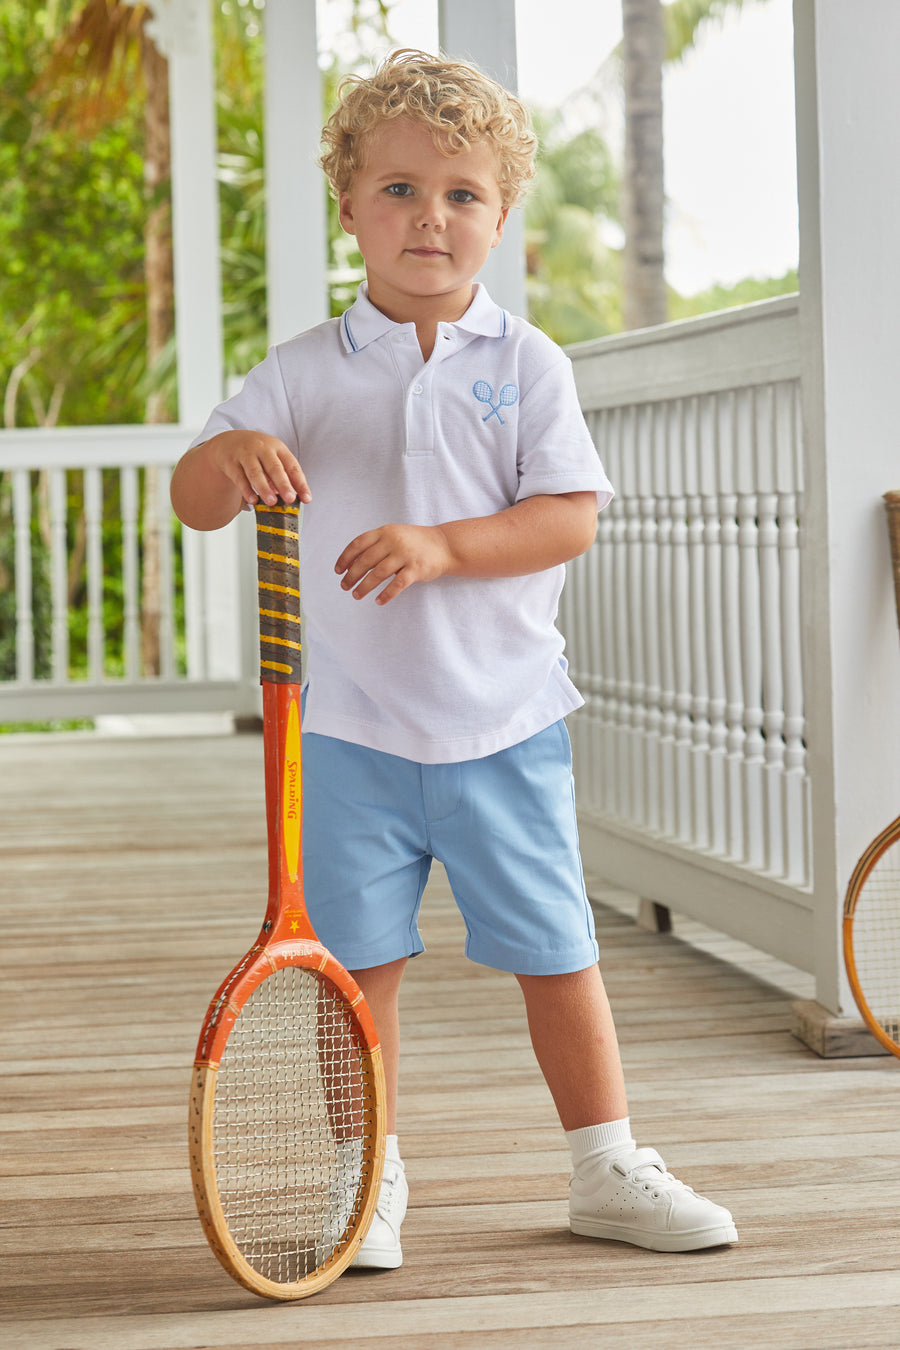 Little English classic boys clothing, white short sleeve polo with tipping at the collar and crossed tennis racket embroidery